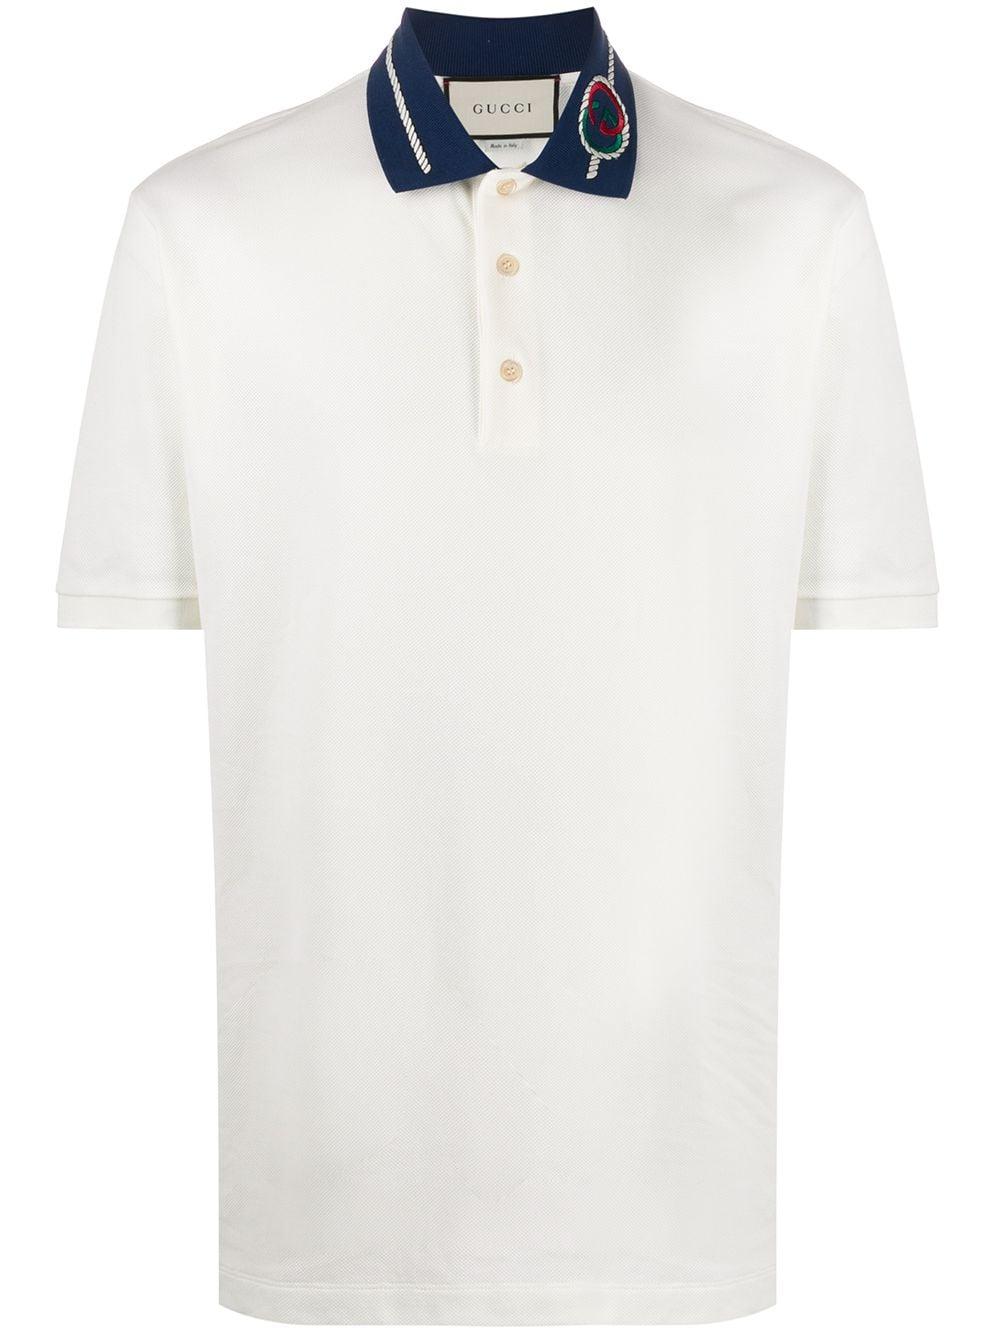 Gucci Cotton Interlocking G Polo Shirt in White for Men - Save 33% - Lyst